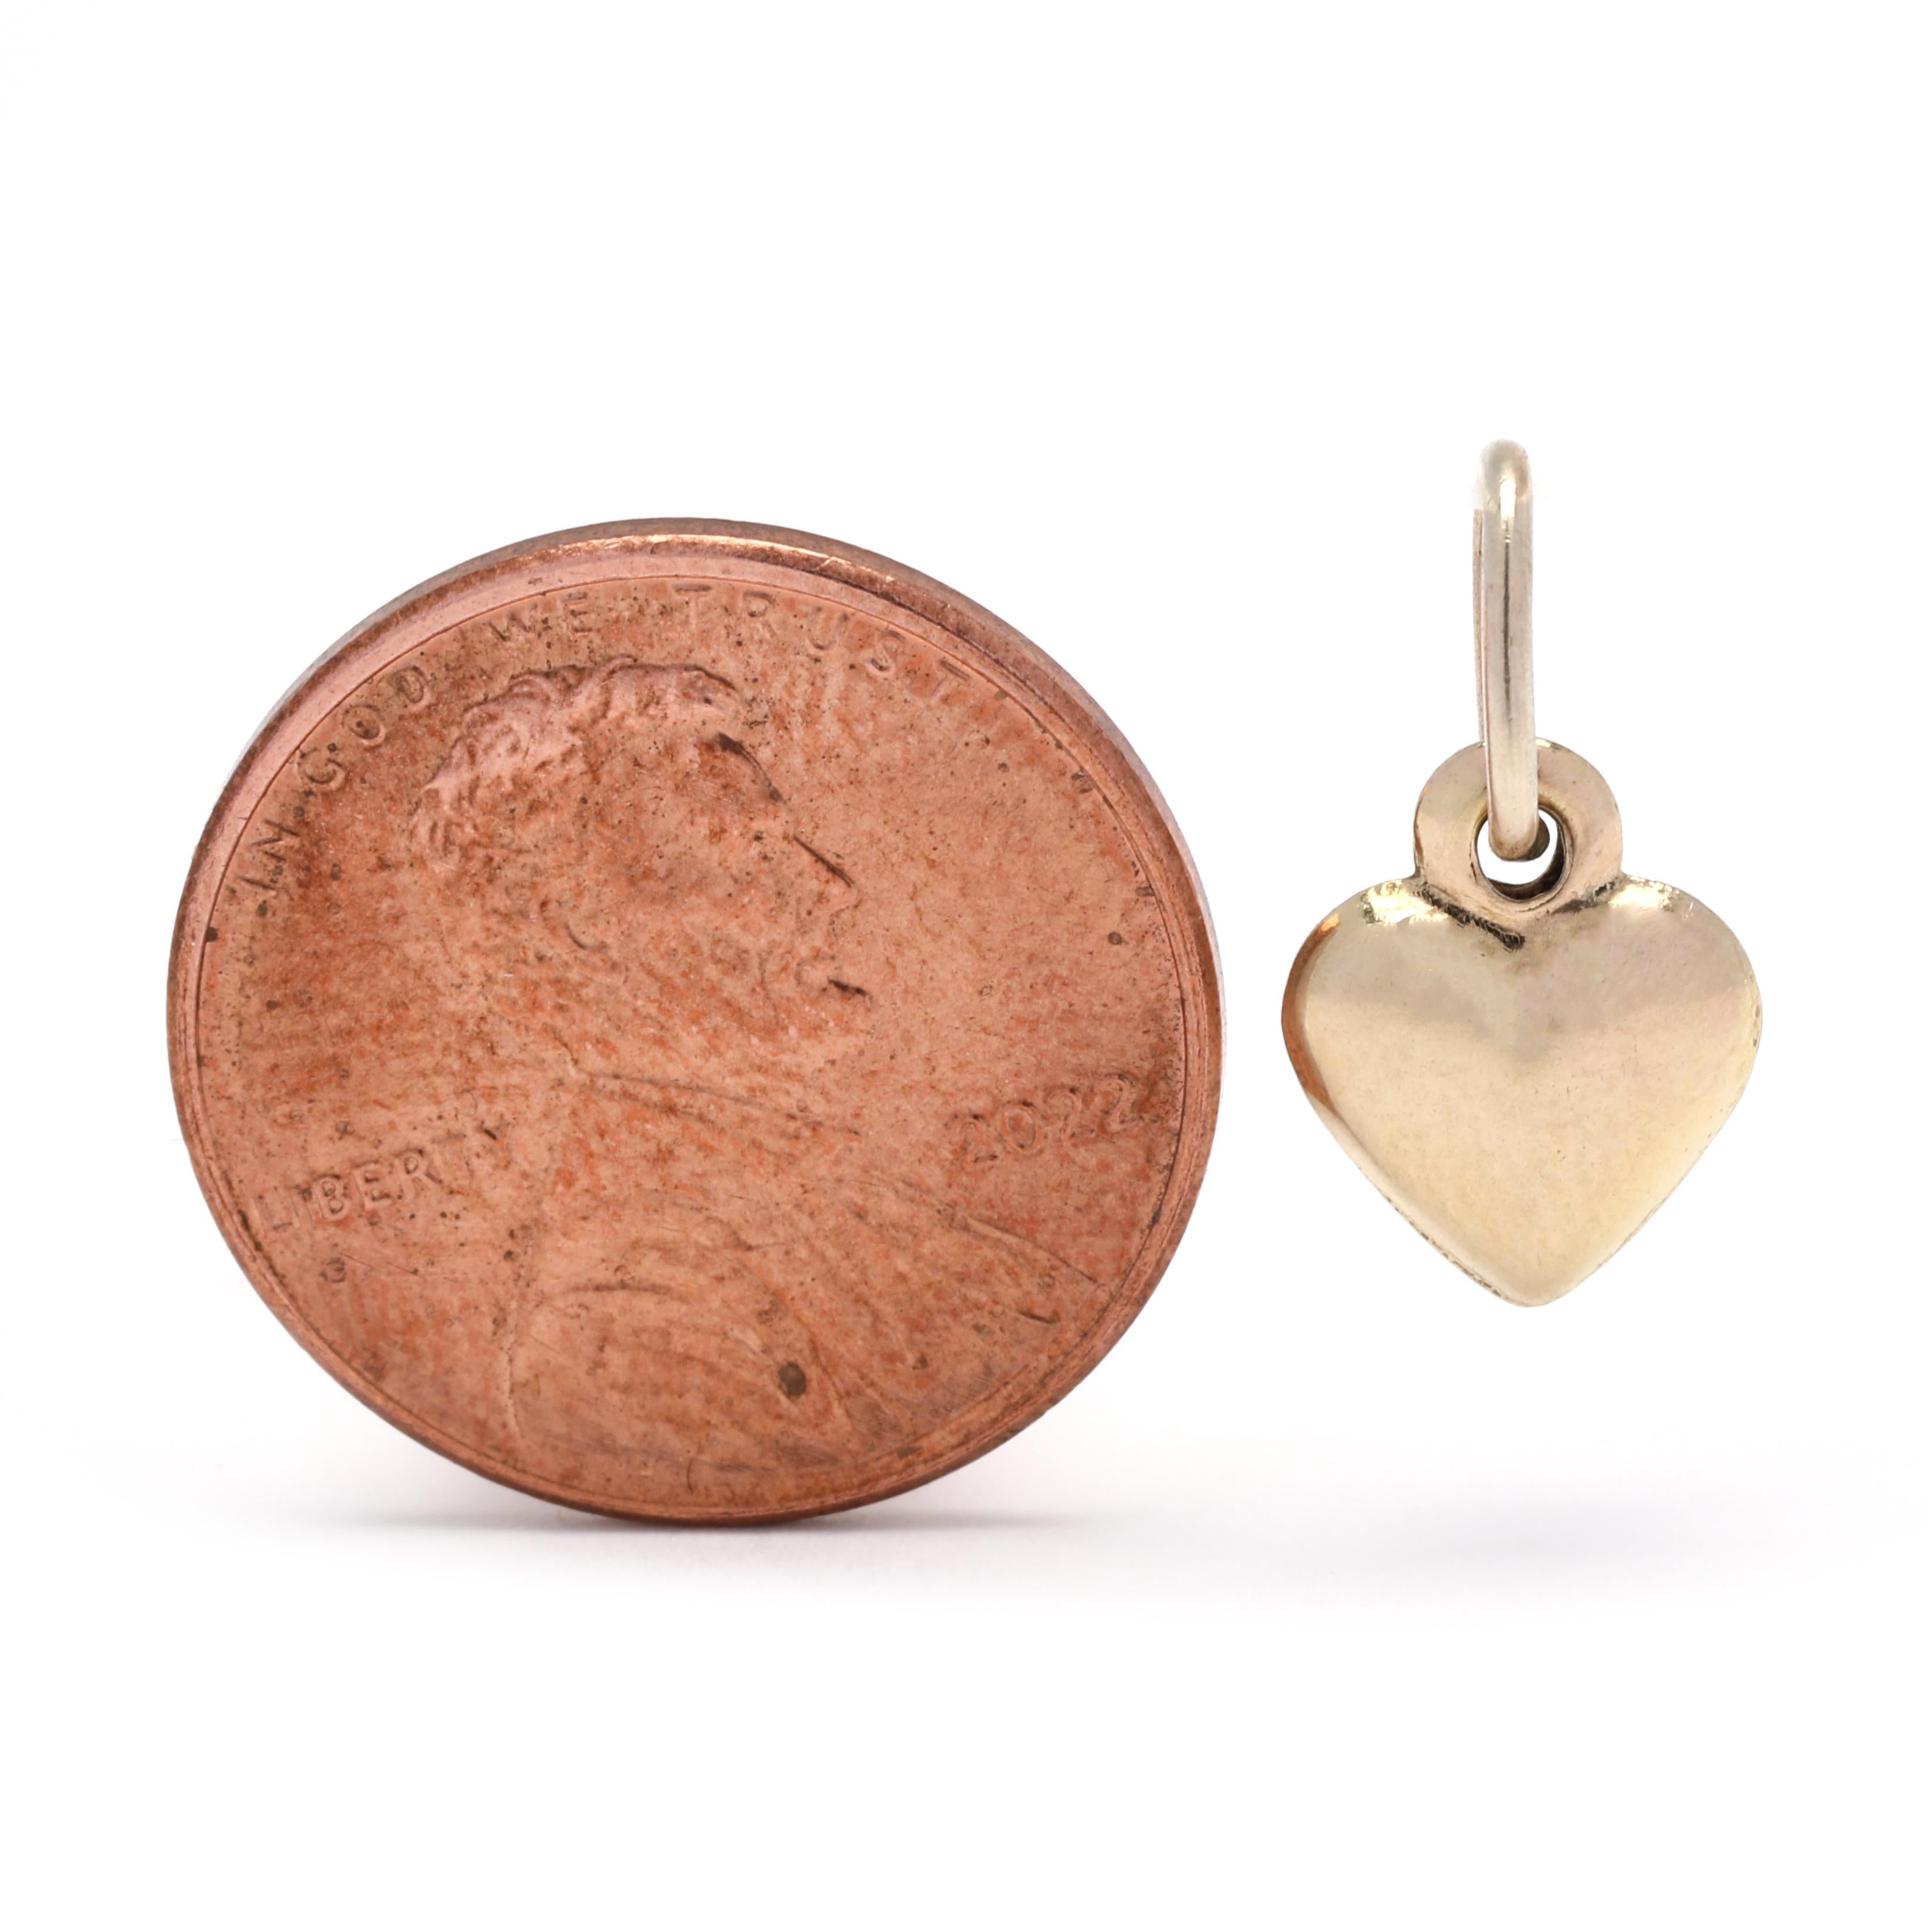 This beautiful 5/8 inch Italian small gold heart charm is crafted from 10K yellow gold and has a classic puff heart design. It is the perfect addition to any charm bracelet, necklace, or other jewelry piece. The timeless and elegant design of this